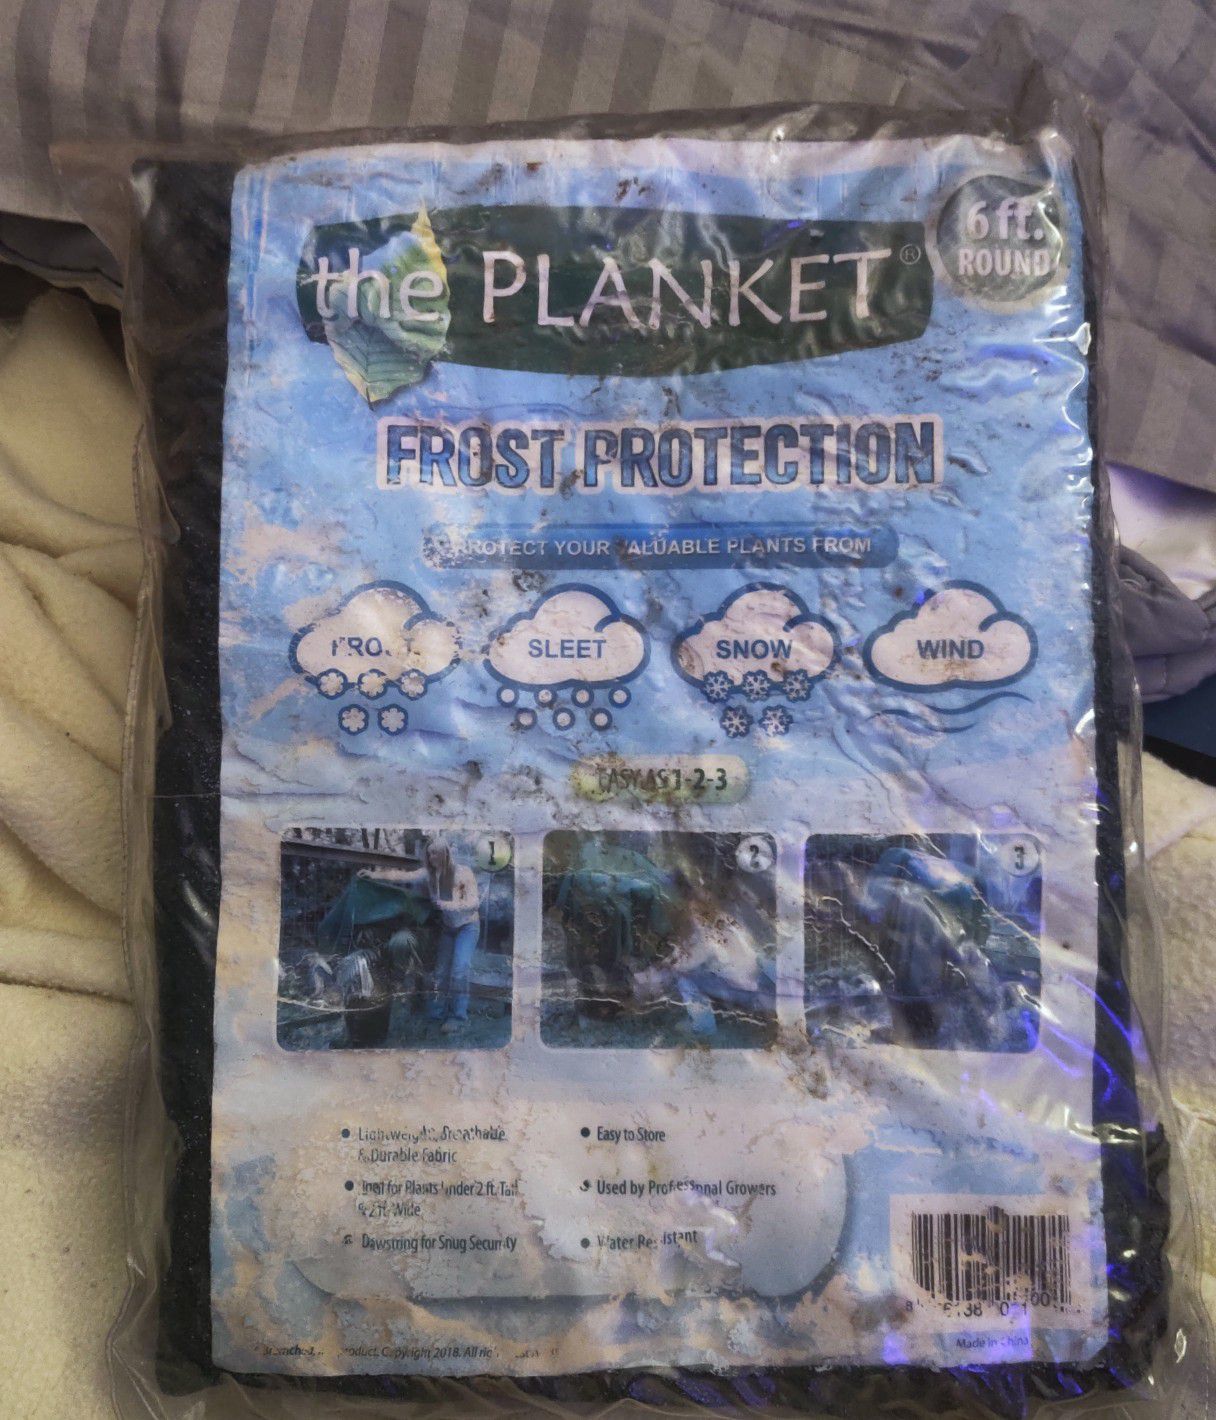 the Planket 6ft Frost Protection Plants